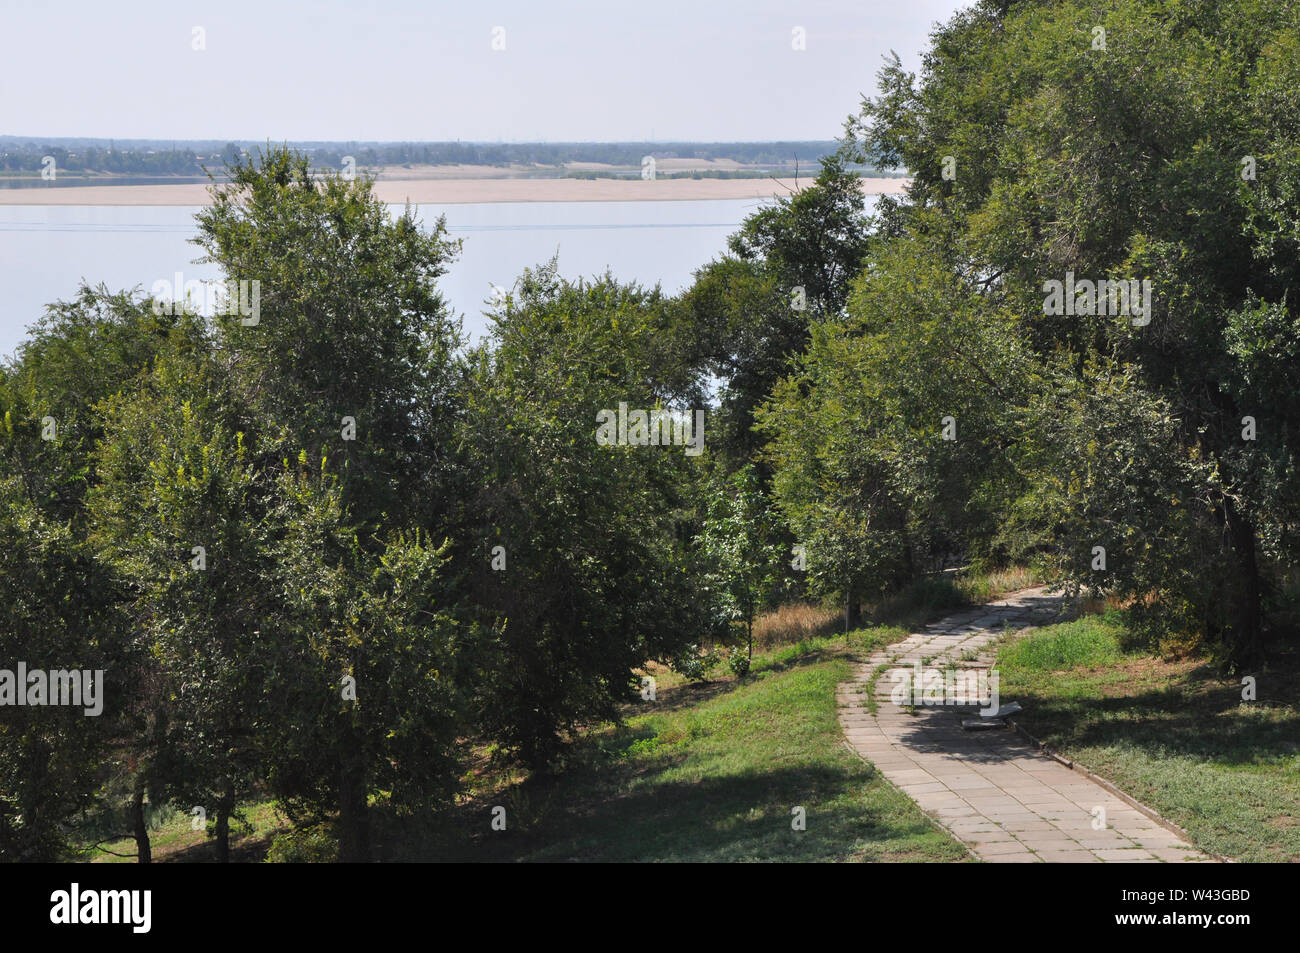 Green elm trees against summer riverscape with a paved concrete path turning right Stock Photo